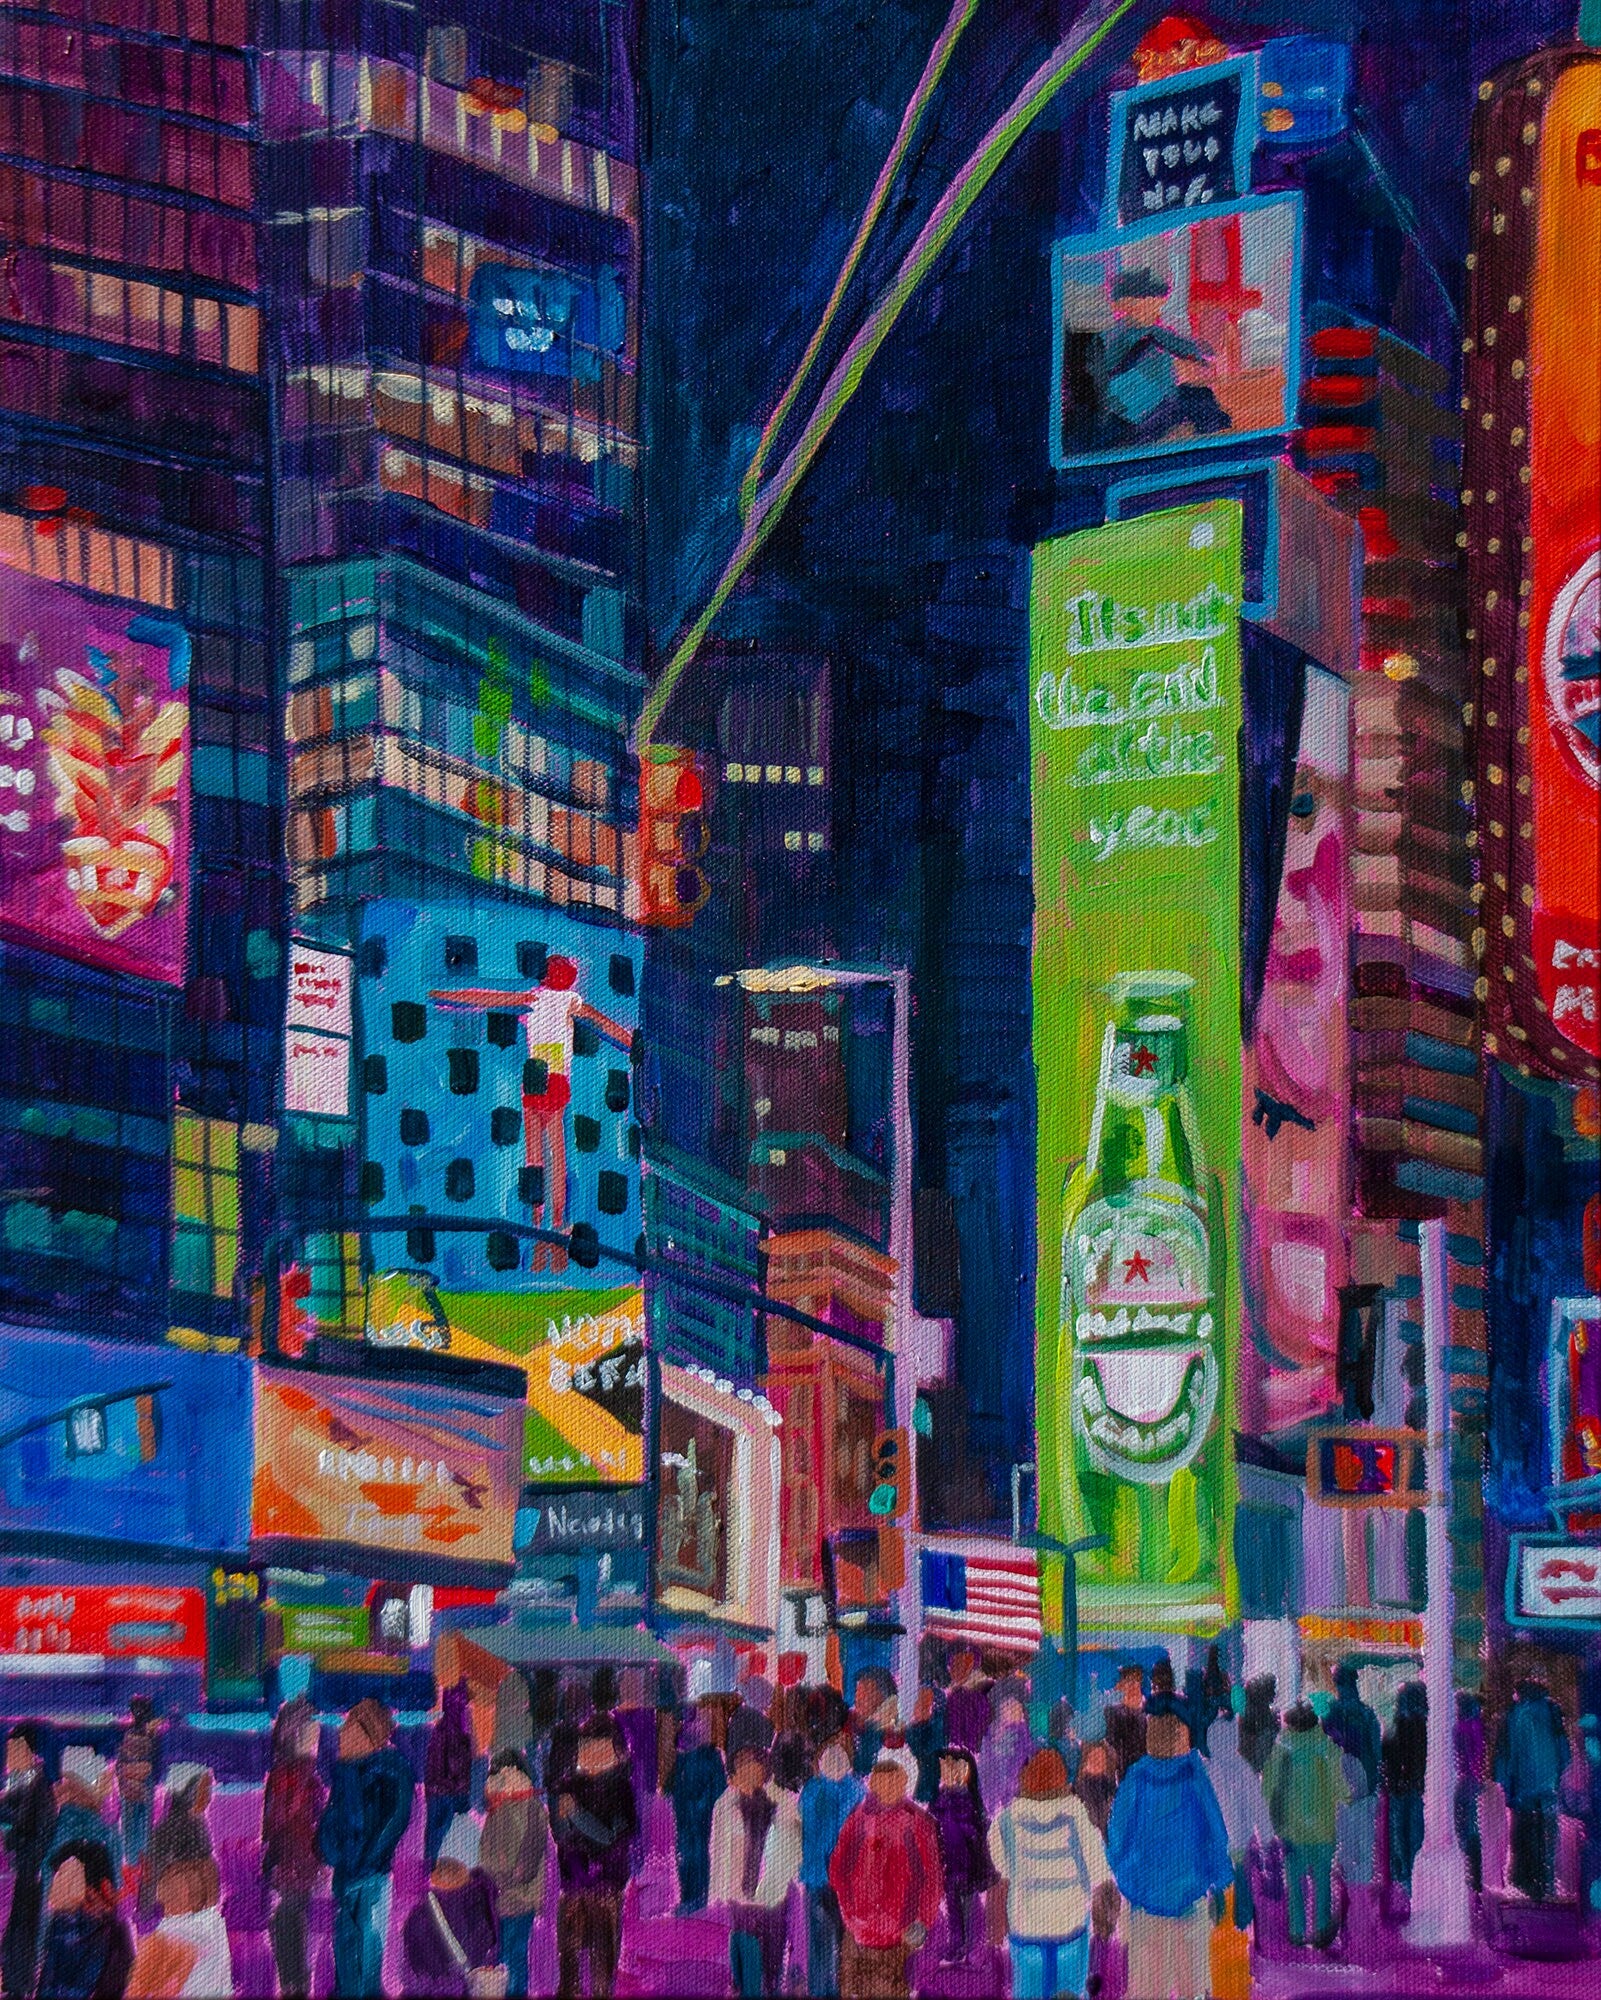 vibrant painting of Times Square in New York City at night with lights, bill boards and people